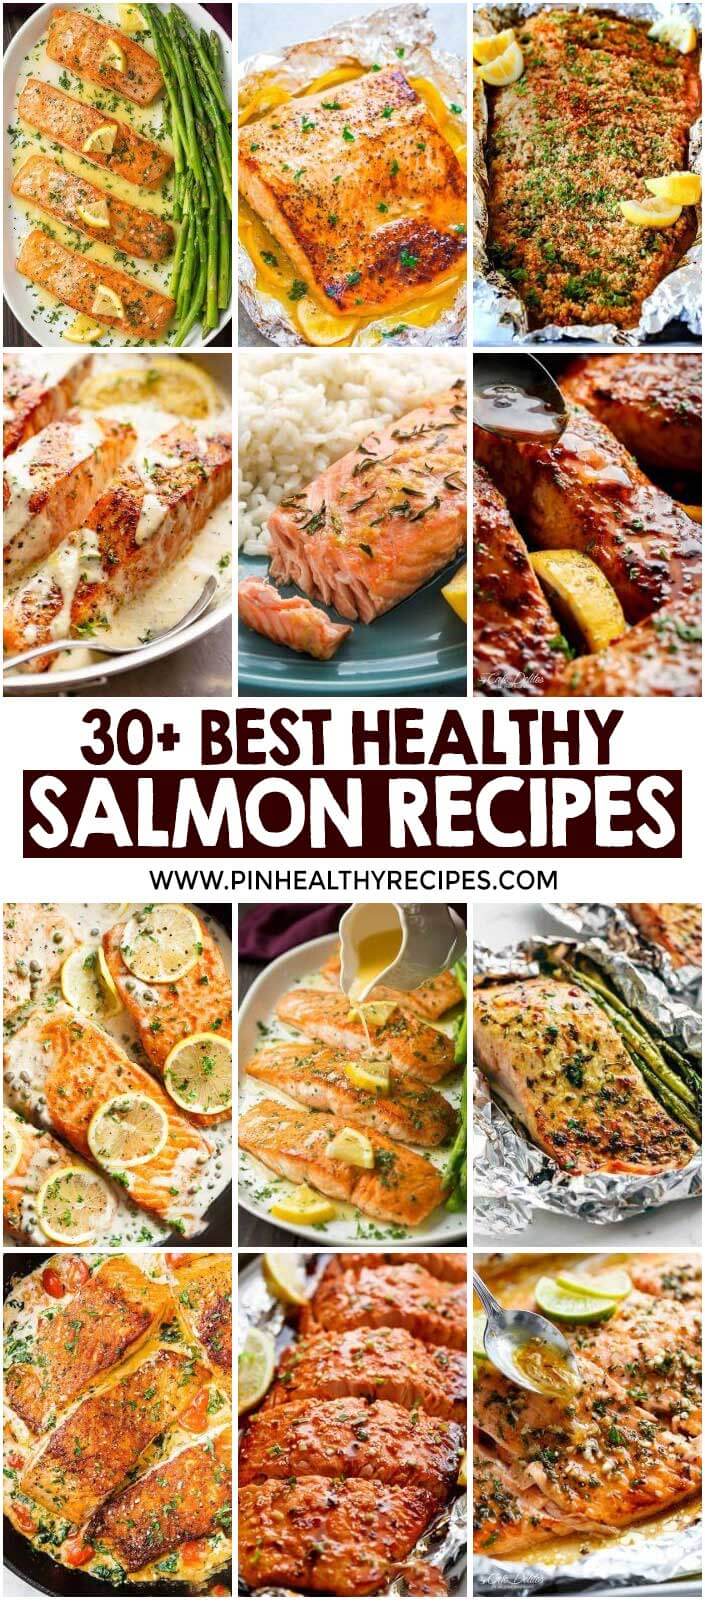 Top-Rated Salmon Recipes For Your Dinner – Pin Healthy Recipes